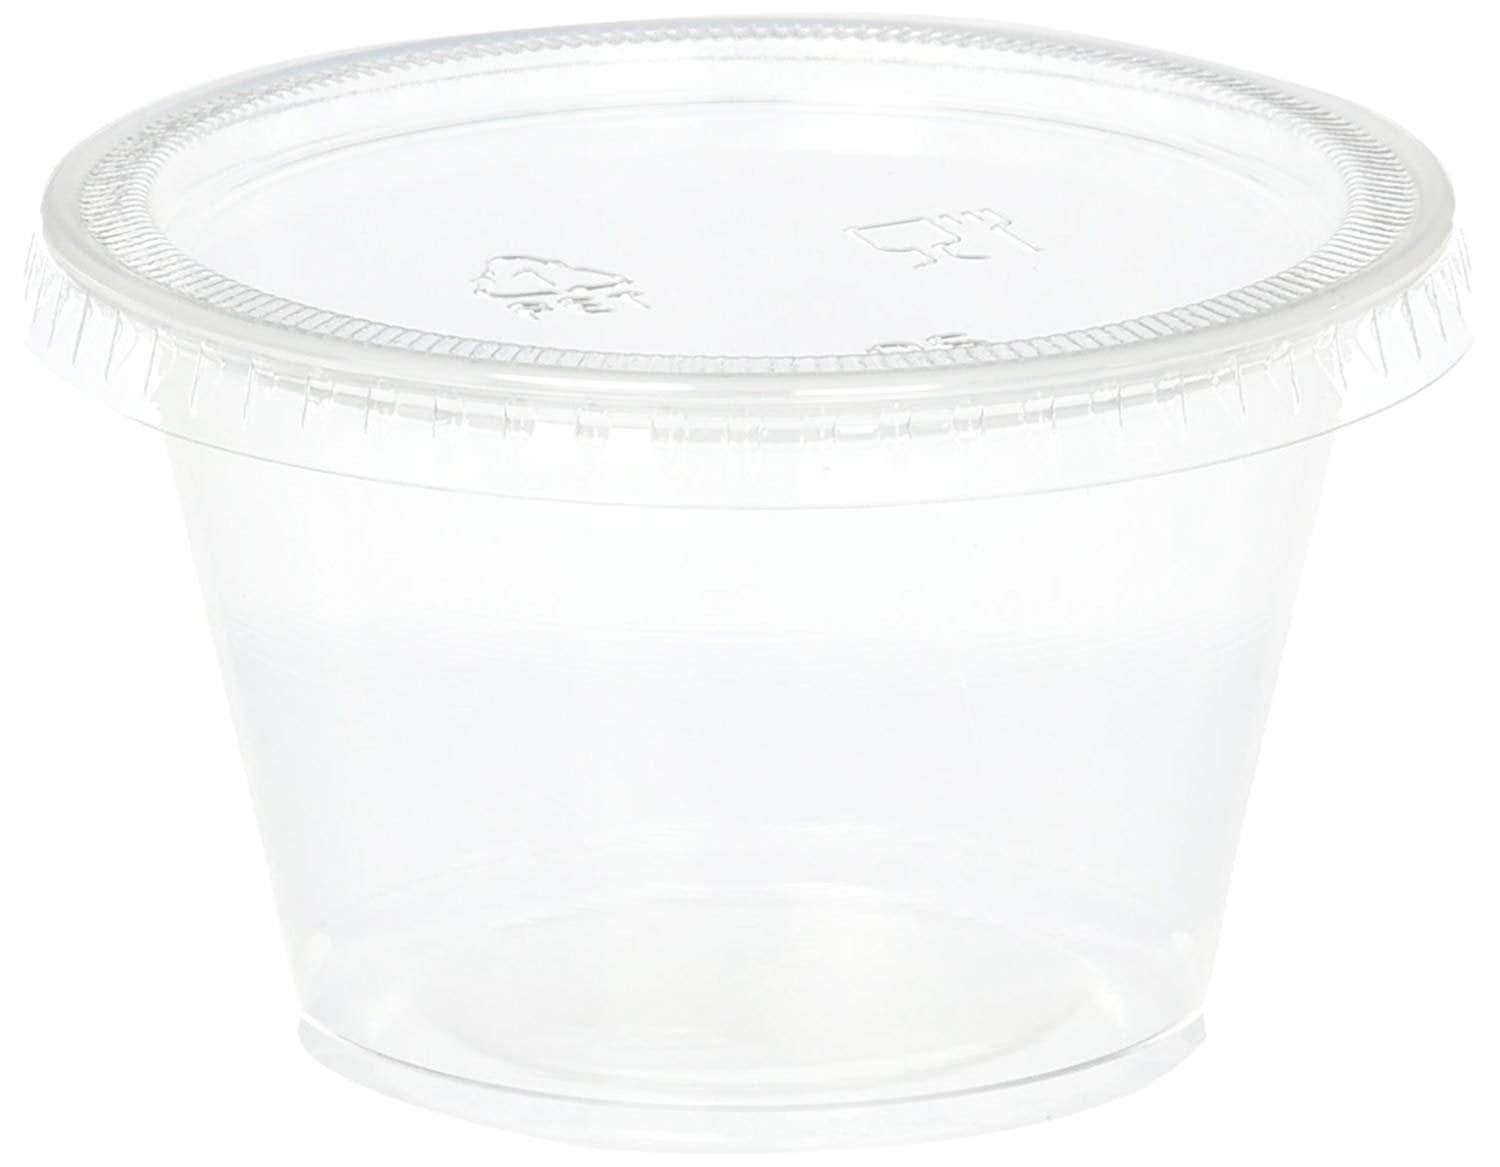 Jello Shot Cups Salad Dressing Souffle Portion Sampling Sample Cup 50, Clear B-KIND Disposable 4oz Plastic Condiment Cups with Lids 